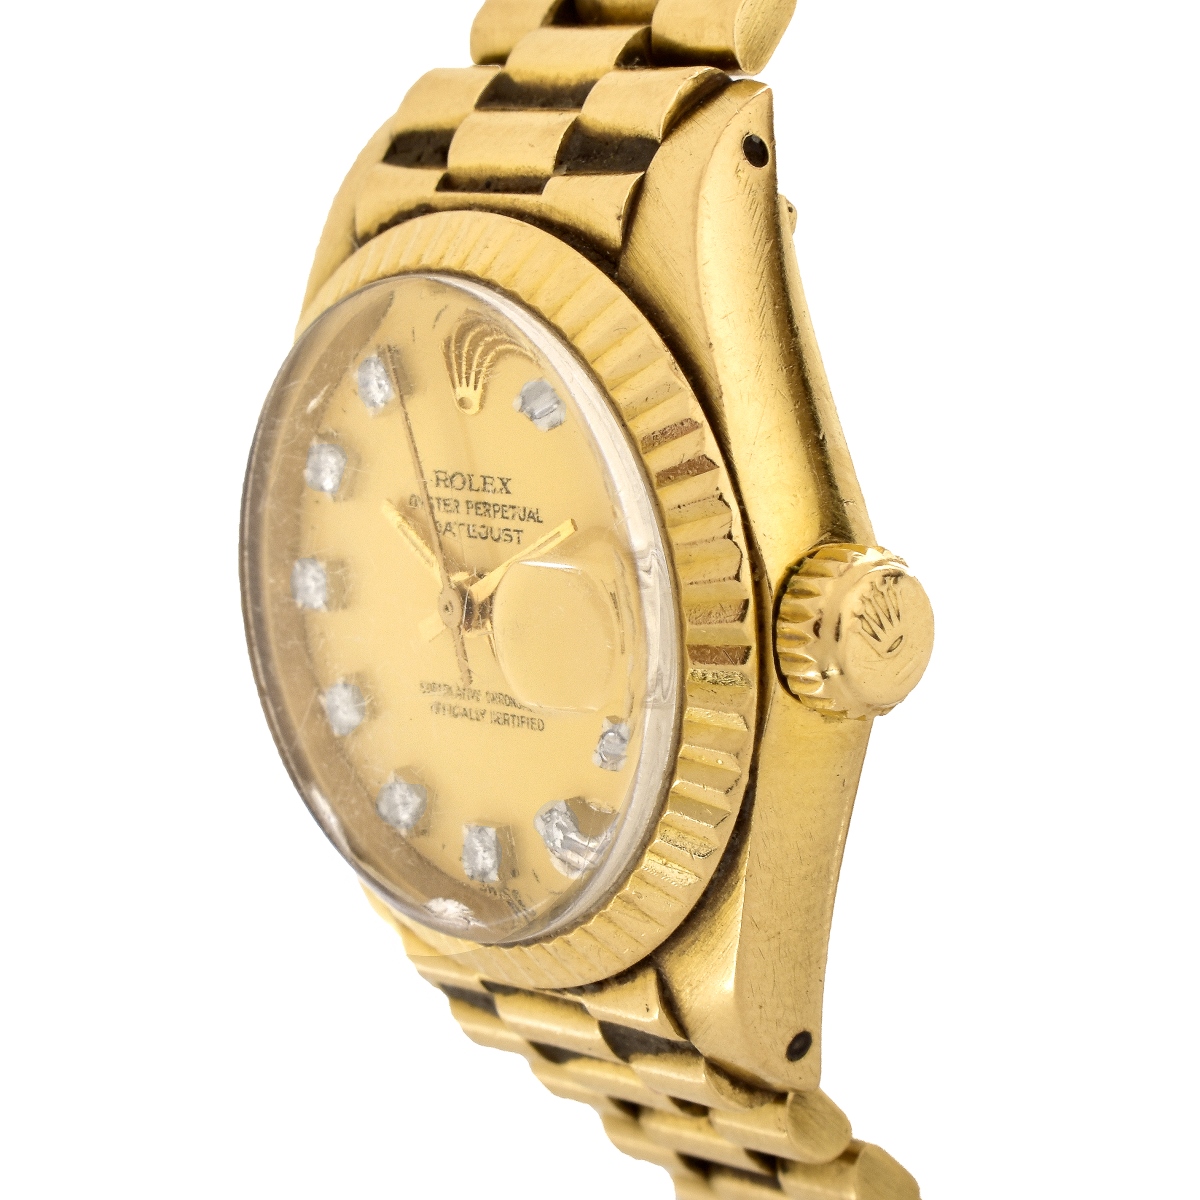 Lady's Rolex 18K Gold Date Just Watch